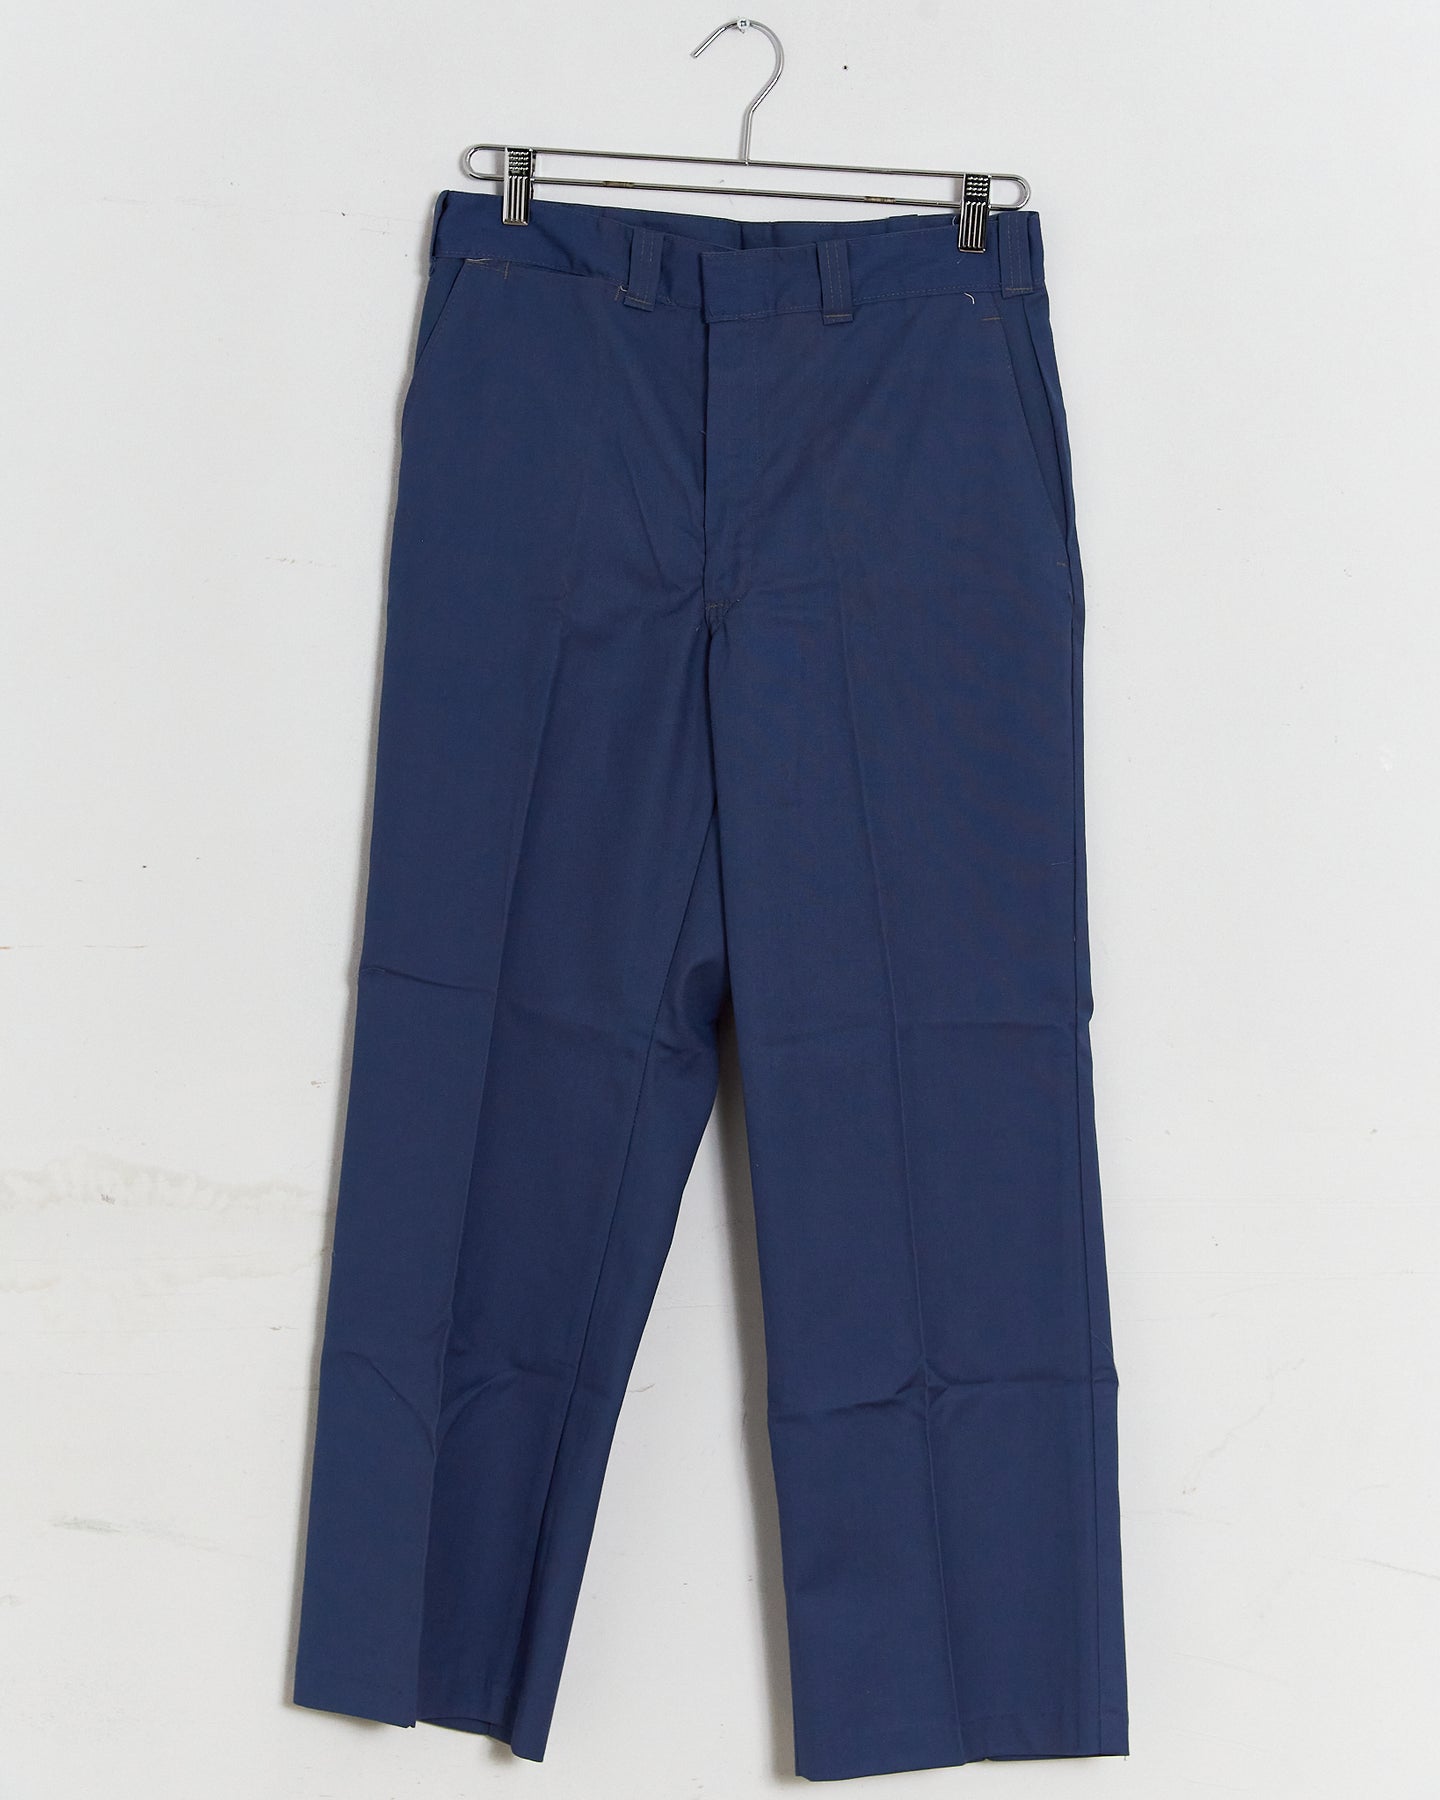 1970s Texmade Work Trousers - 30x27 - Deadstock